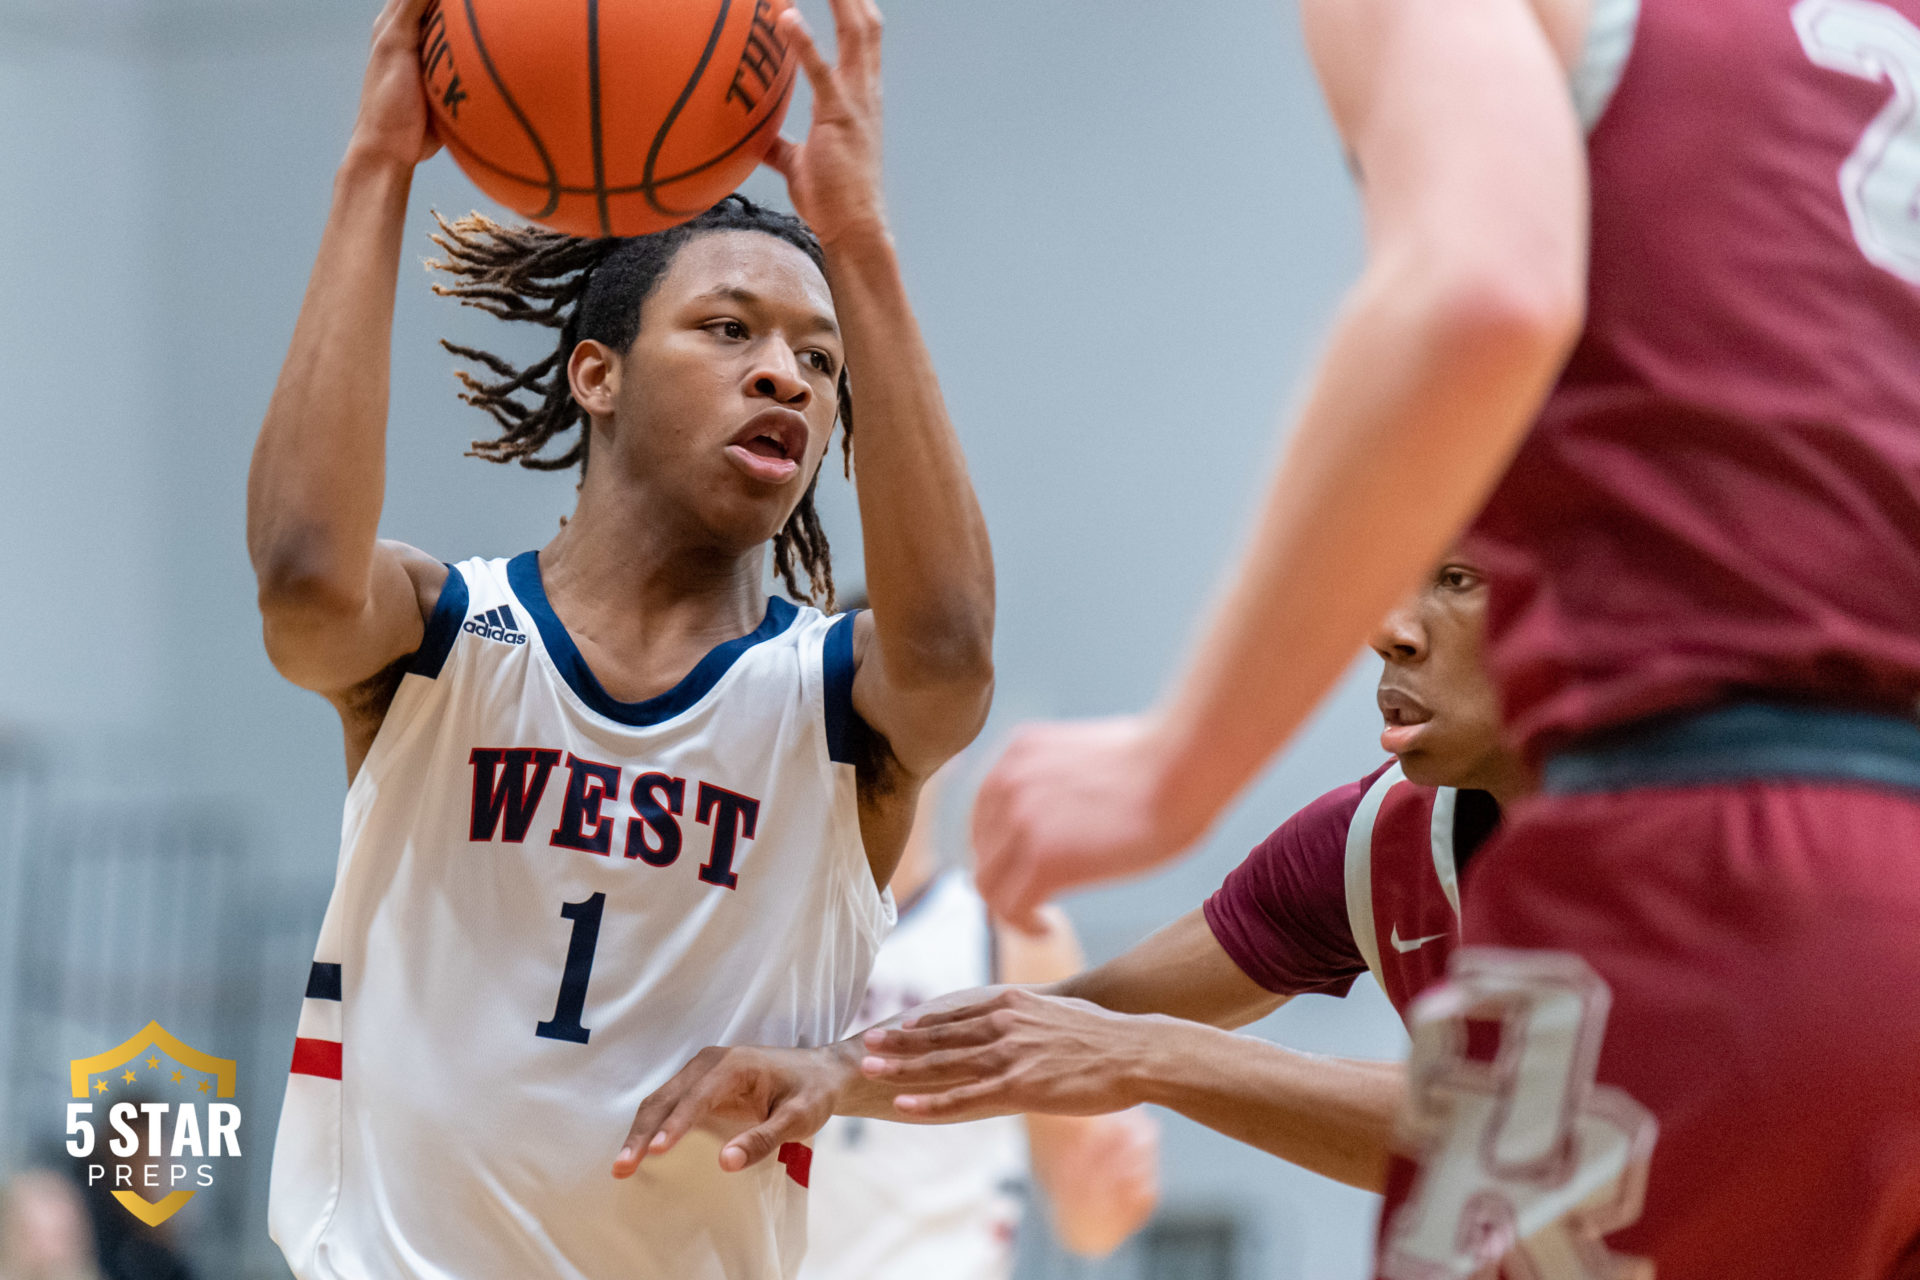 5STAR PHOTOS: Oak Ridge Wildcats at Knoxville West Rebels - Tuesday, Jan. 25, 2022 - Five Star Preps